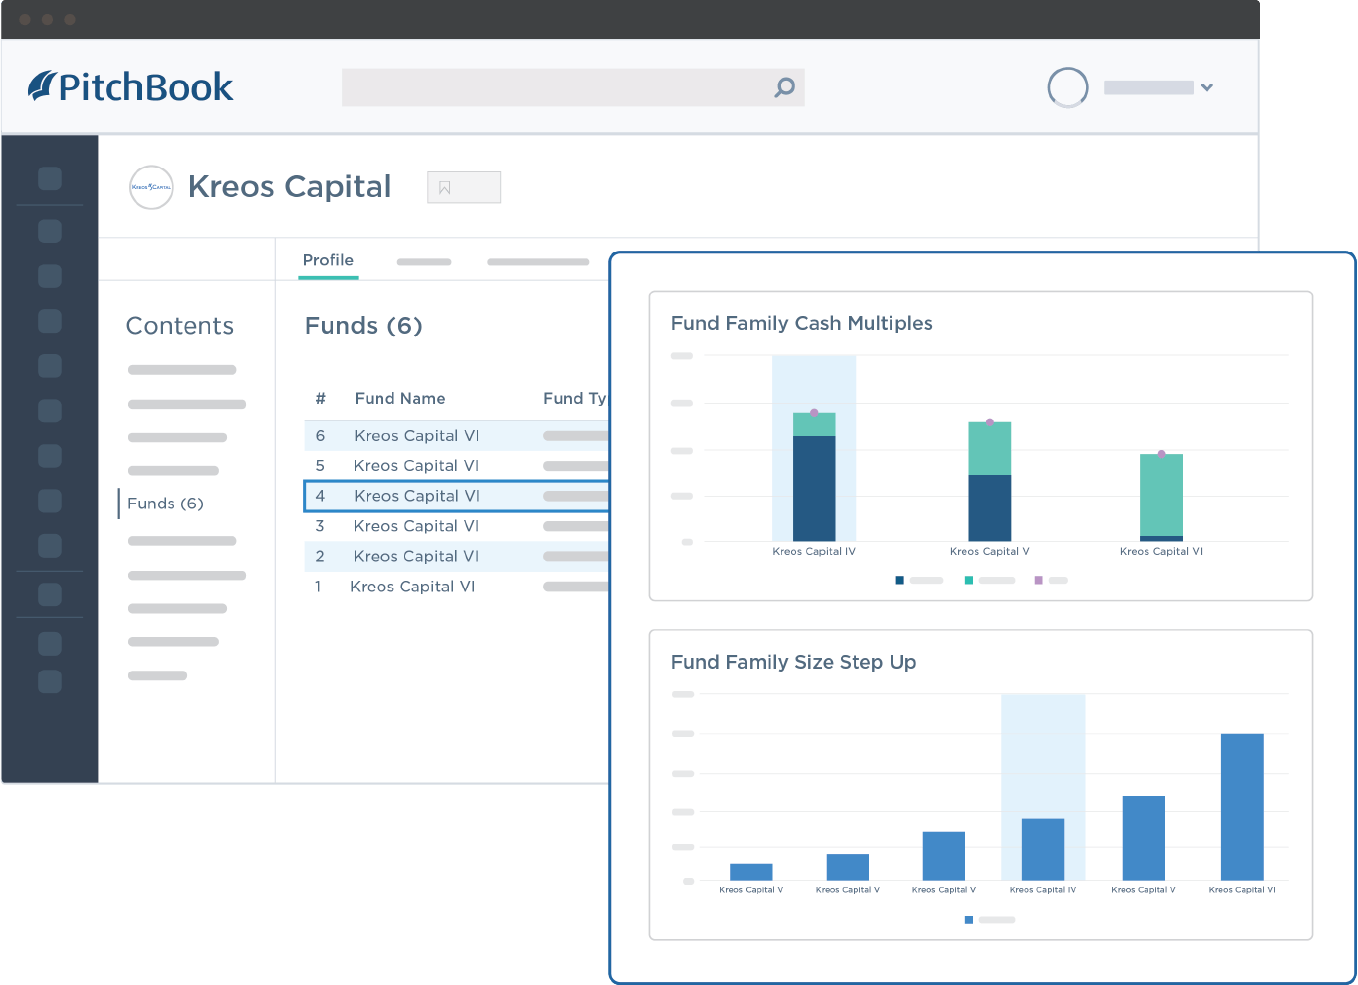 PitchBook data showing Kreos Capital’s fund family cash multiples and step ups.